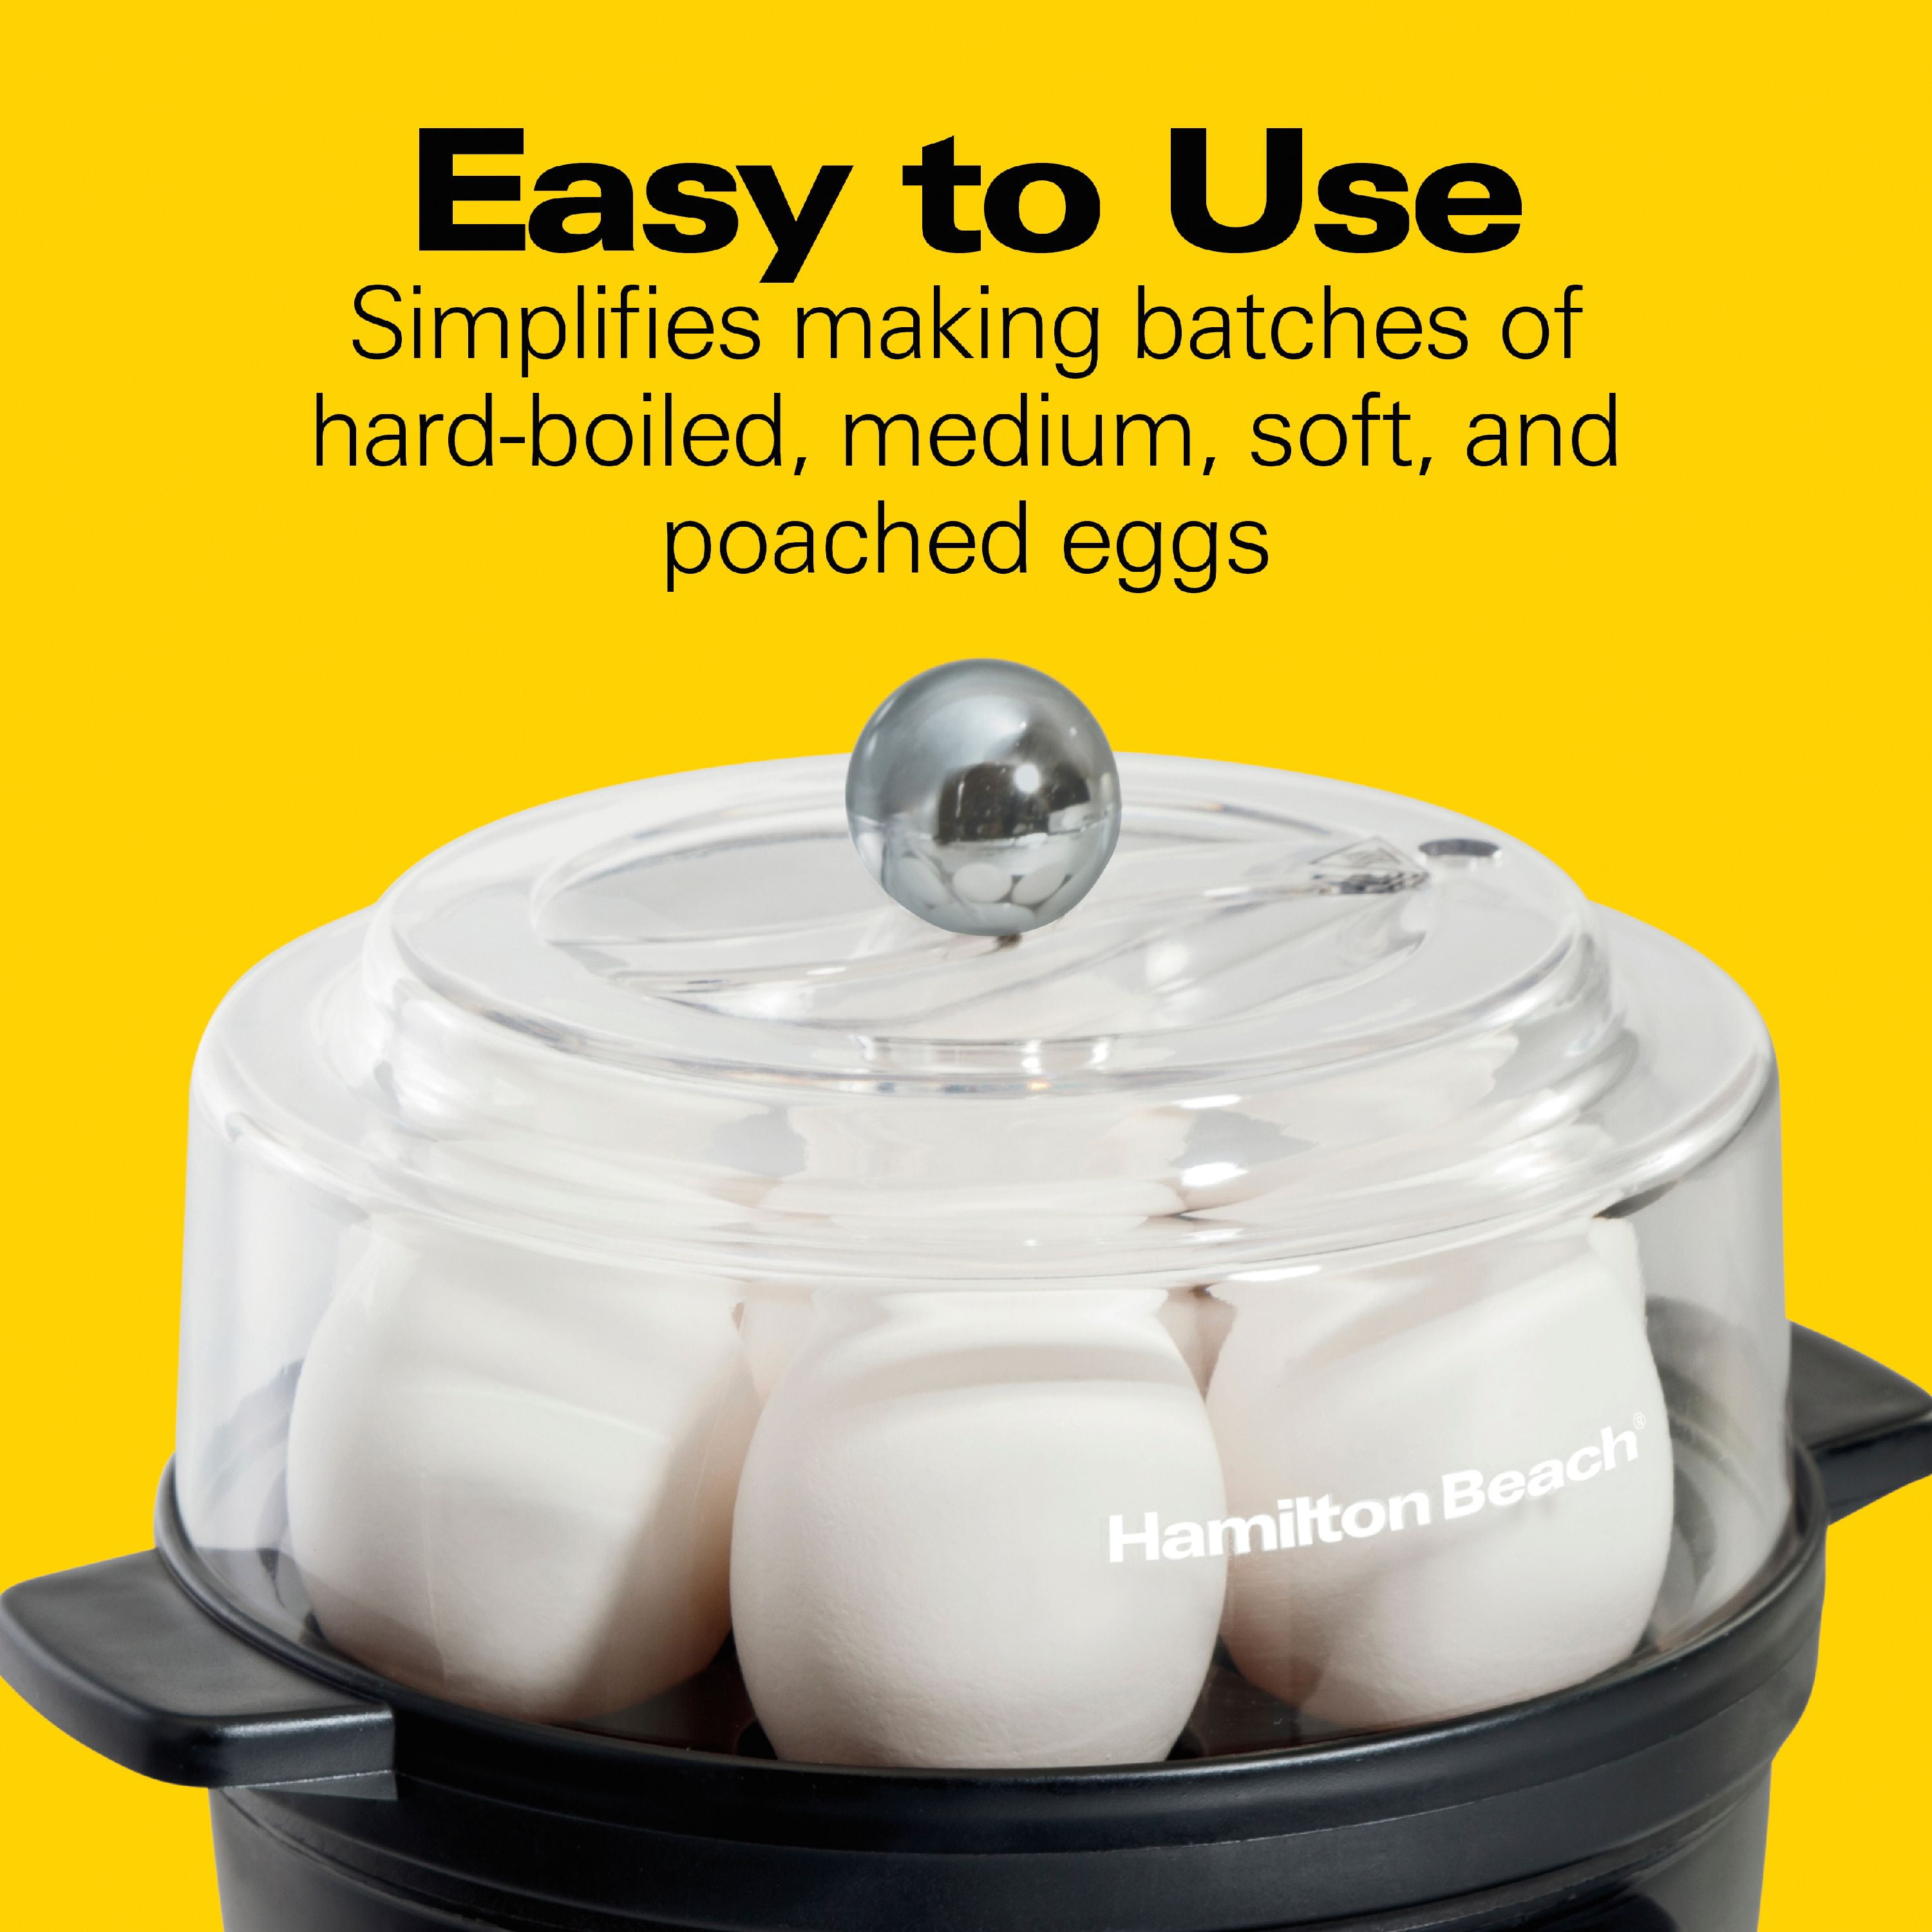 Egg Cooker with Built-In Timer, Poaching Tray - 25500